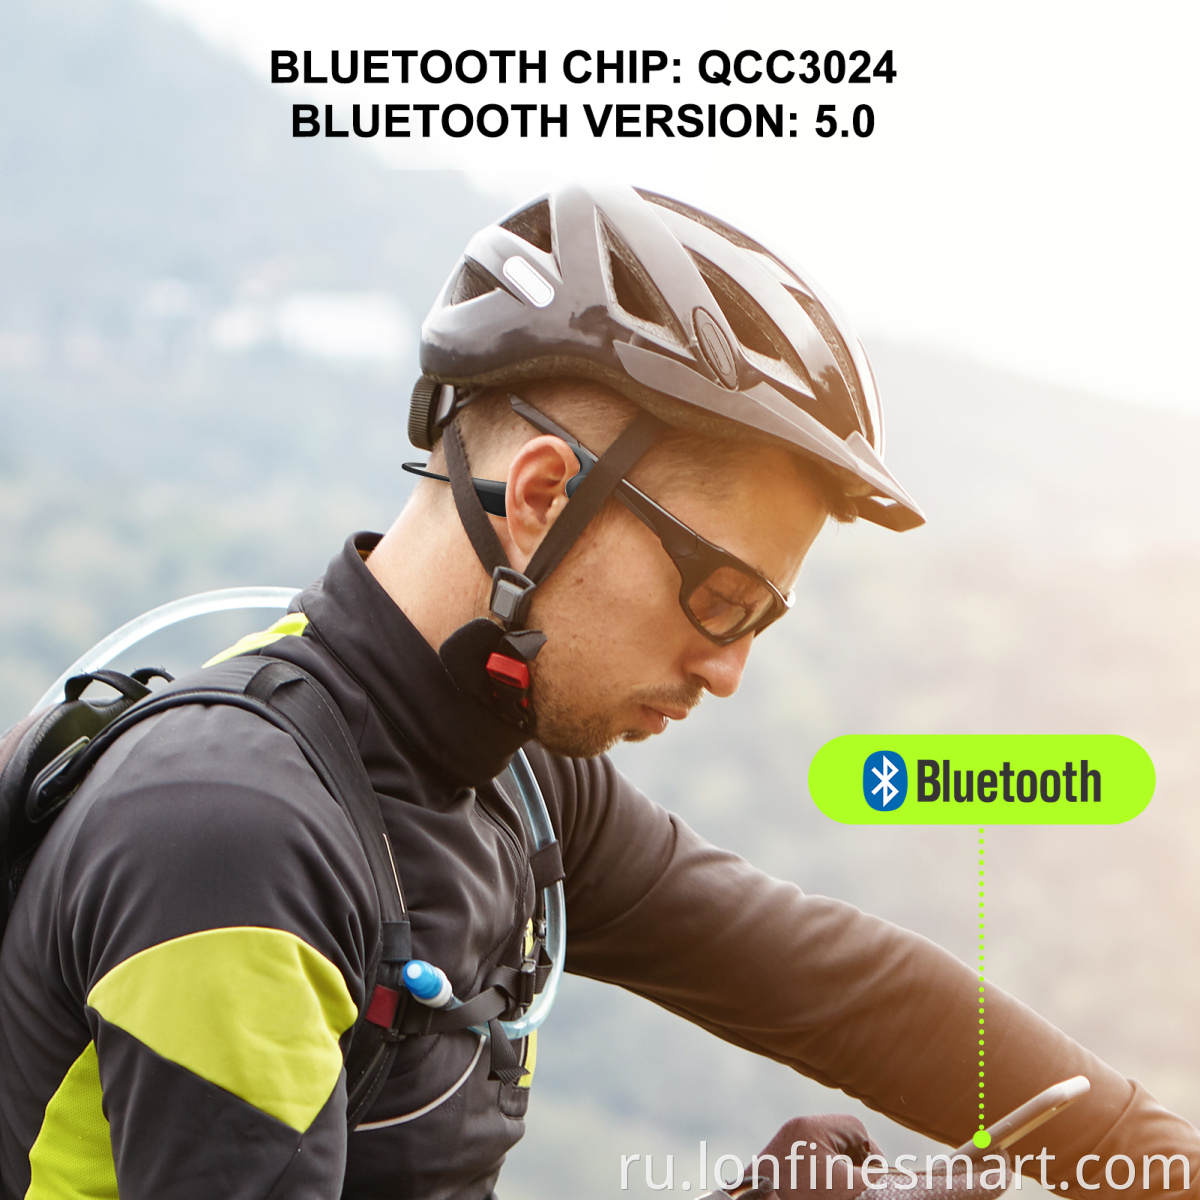 Wireless Blue tooth Headsets